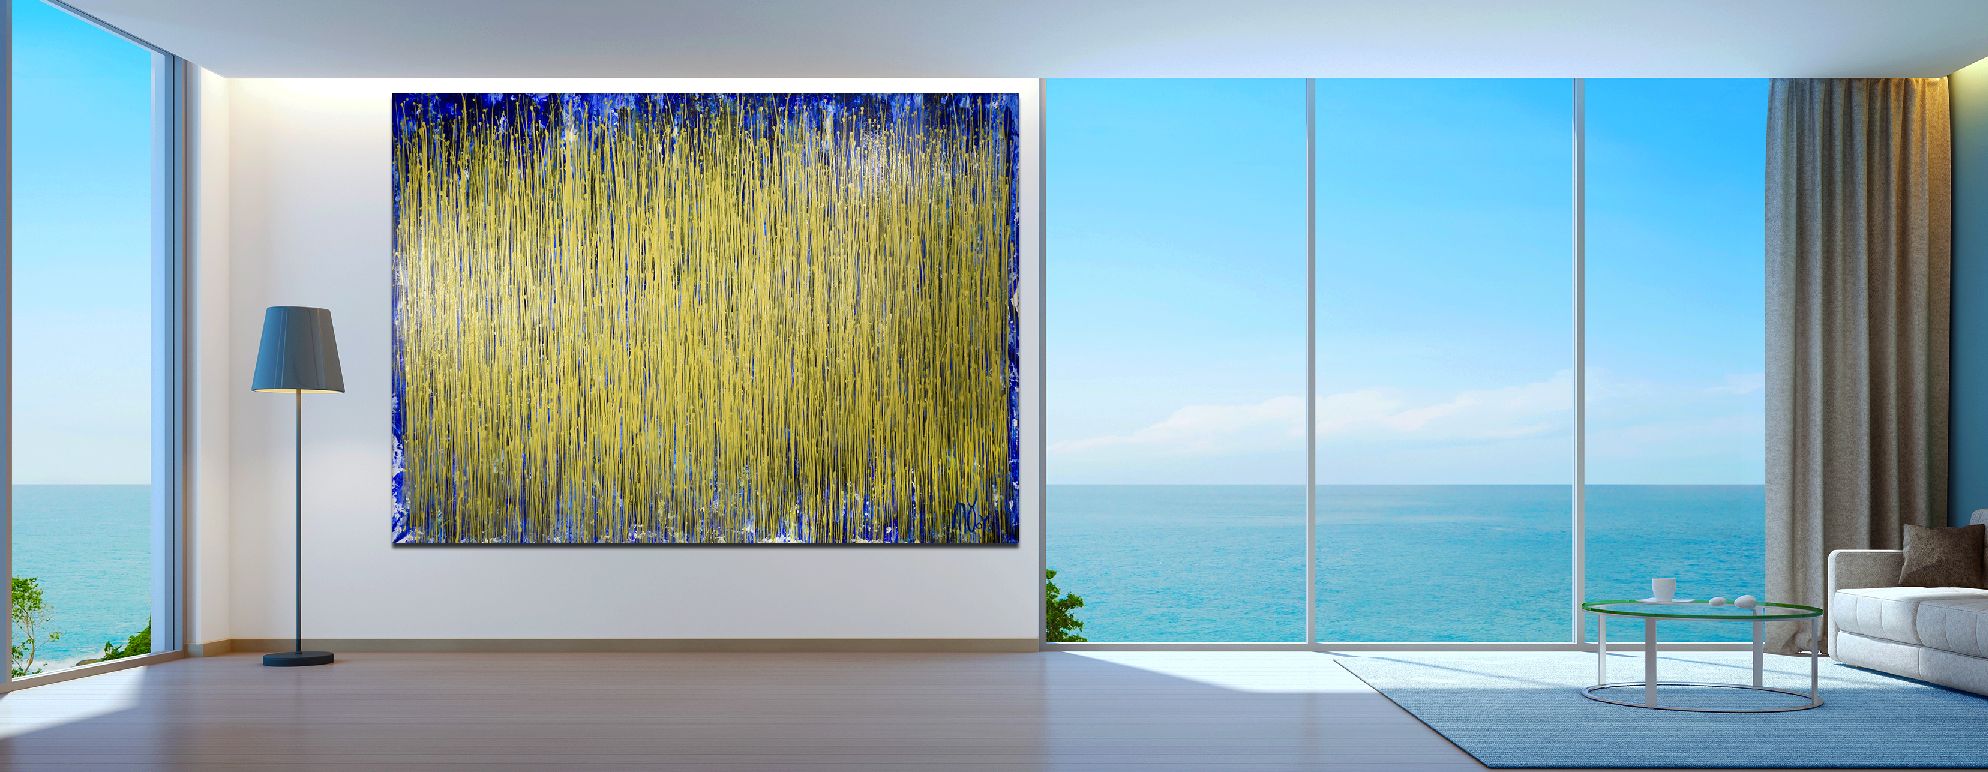 Room View - Thunder silhouettes (Golden Spectra) by Nestor Toro 2020 (SOLD)